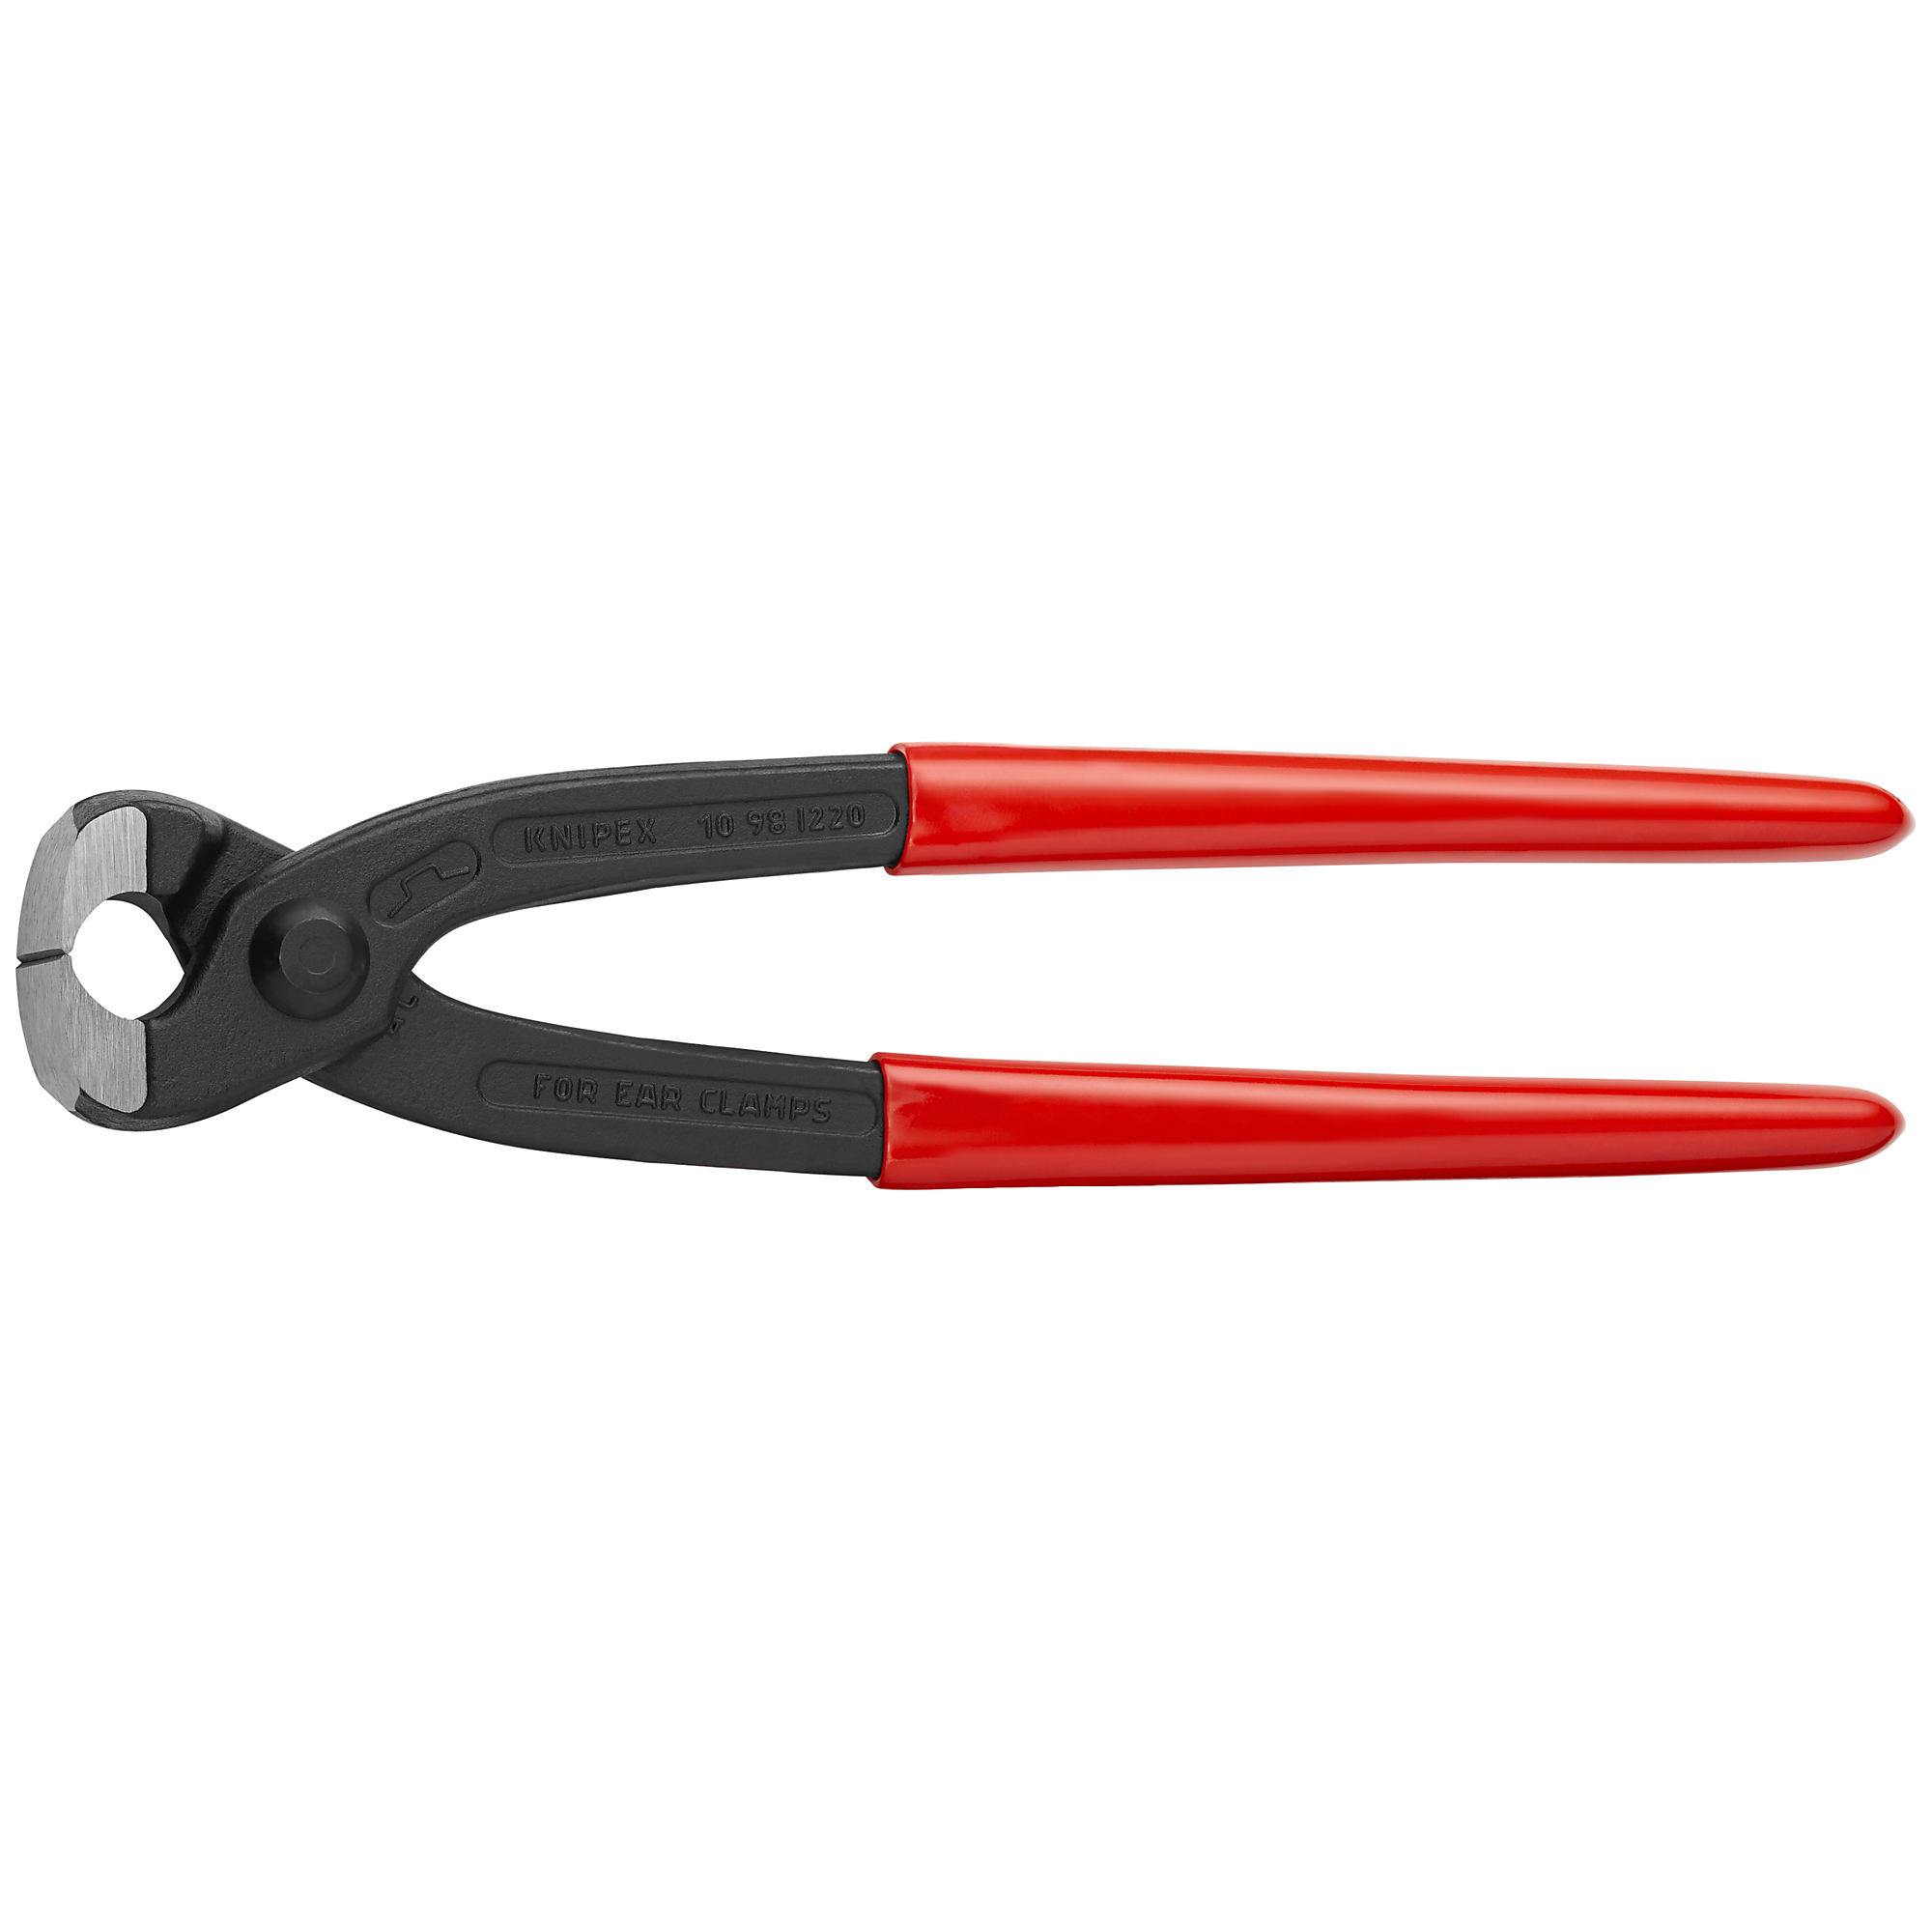 KNIPEX, Ear Clamp Pliers, Plastic coating, Bulk, 8.75Inch, Pieces (qty.) 1 Material Steel, Model 10 98 I220